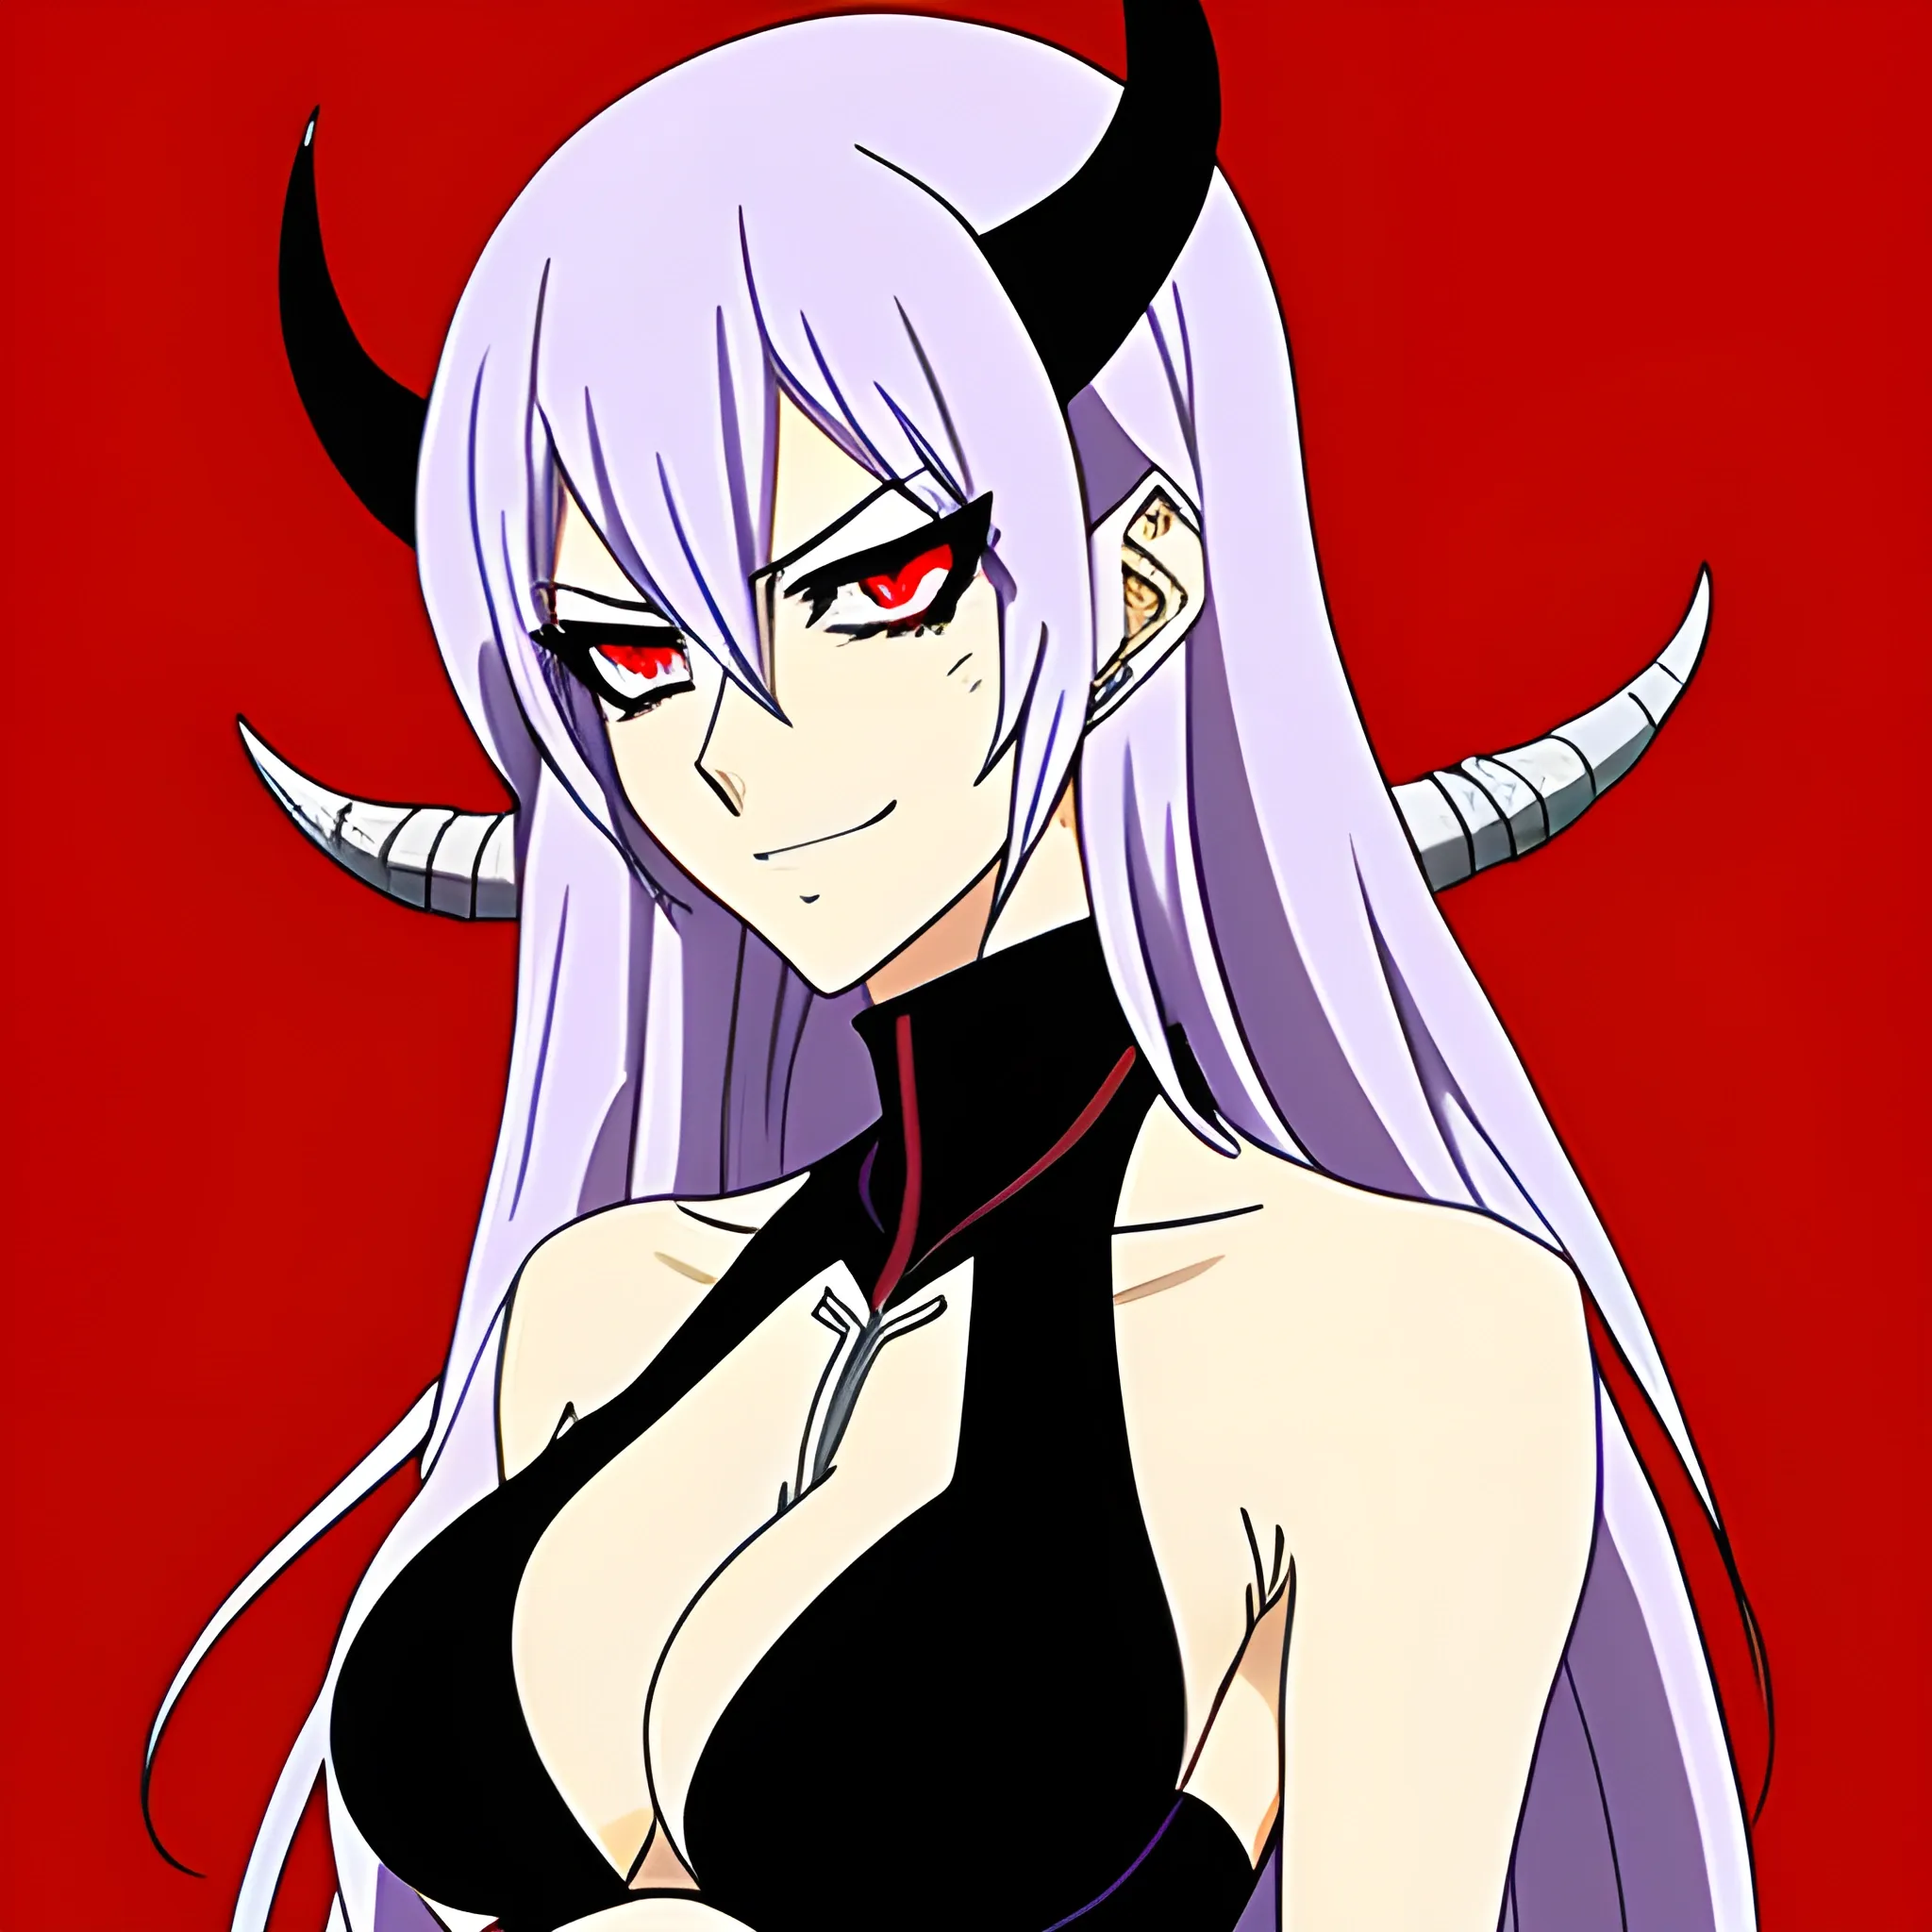 A demon girl in anime style
